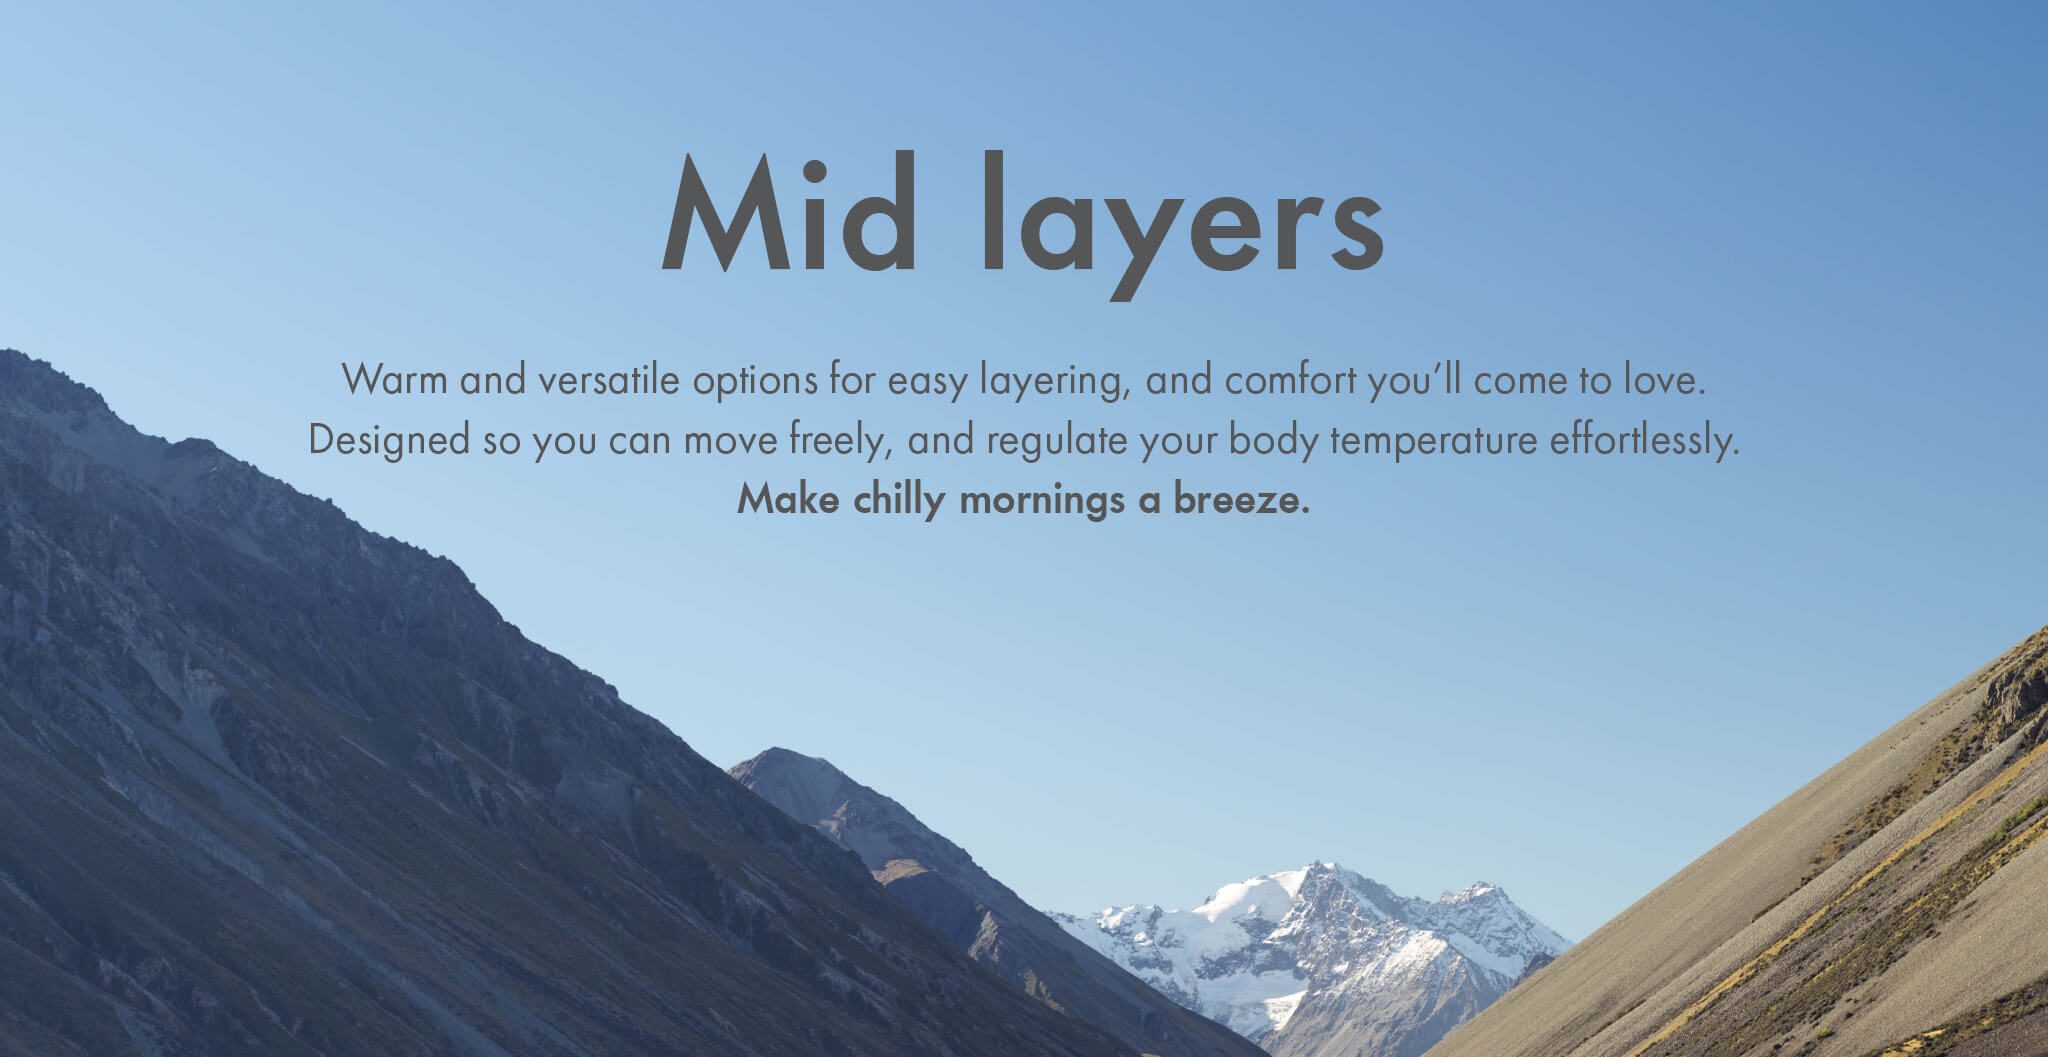 Mid layers - Warm and versatile options for easy layering, and comfort you’ll come to love. Designed so you can move freely, and regulate your body temperature effortlessly. Make chilly mornings a breeze.